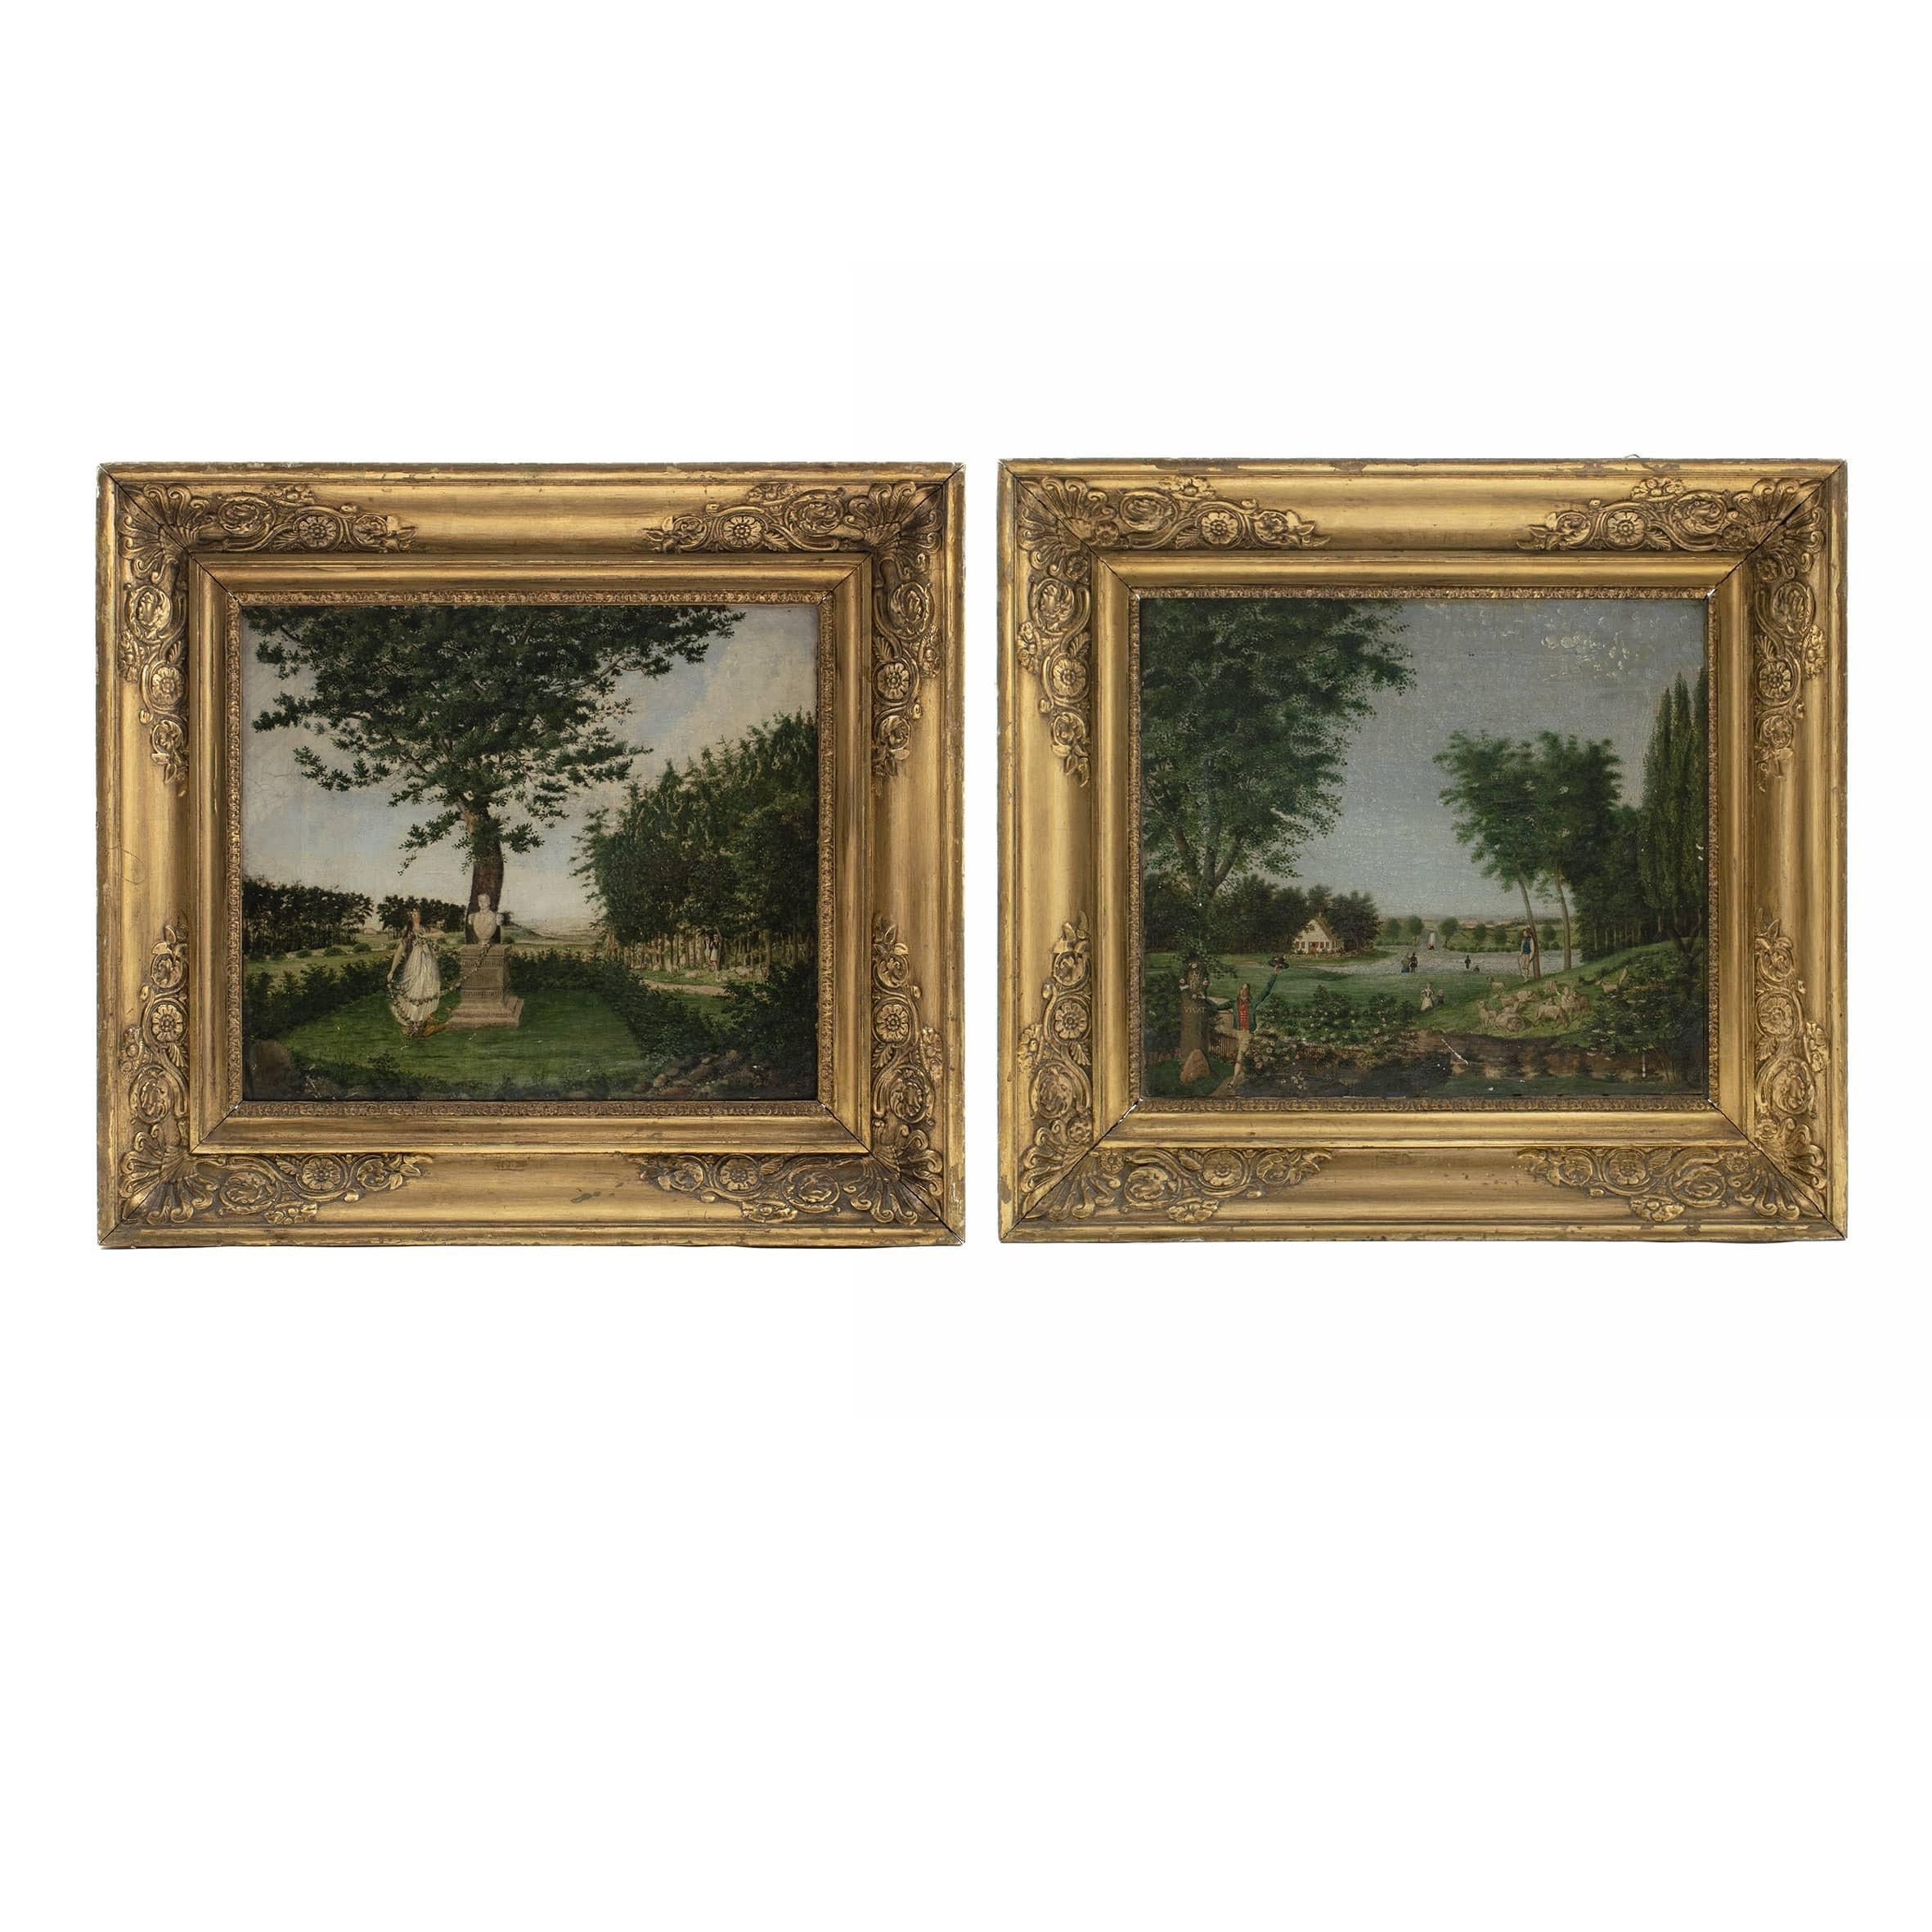 Pair of naïve allegorical landscape paintings.
Oil on canvas 
Signed Lieutenant Christian Georg V. Lind , 1837 and 1838.
See text on the back.
In original gilded Damgaard frames. Etiquette from here.

A pair of charming and decorative